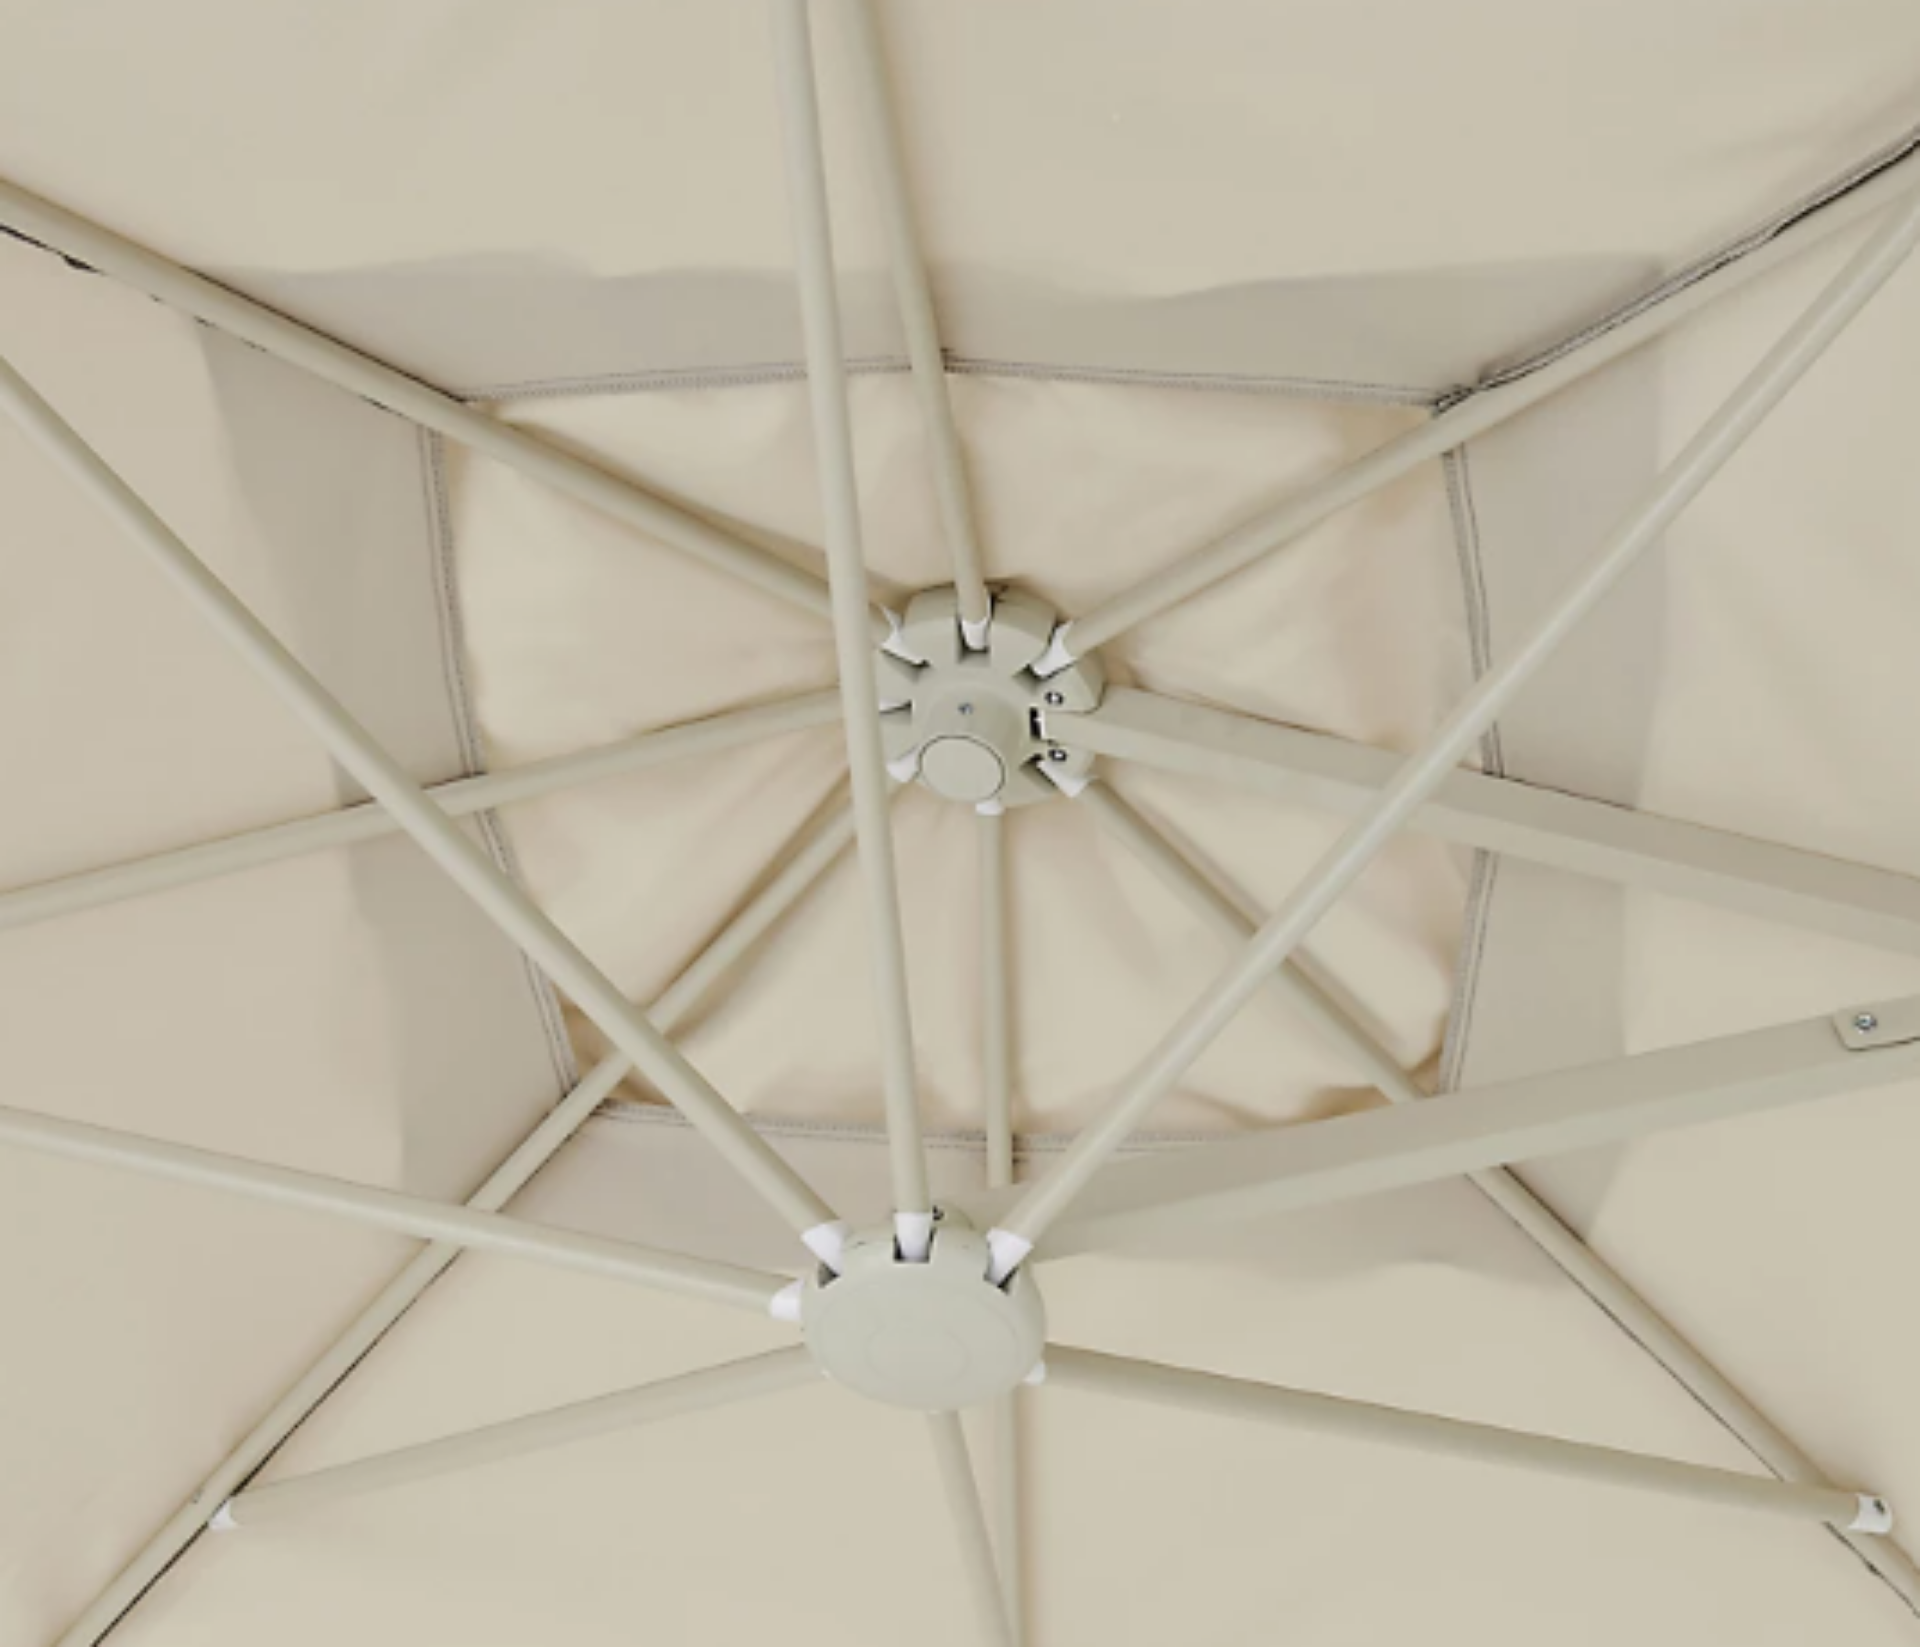 New & Boxed Luxury 2.5m Sand Overhanging Parasol- Sand. This square overhanging parasol provides - Image 4 of 6